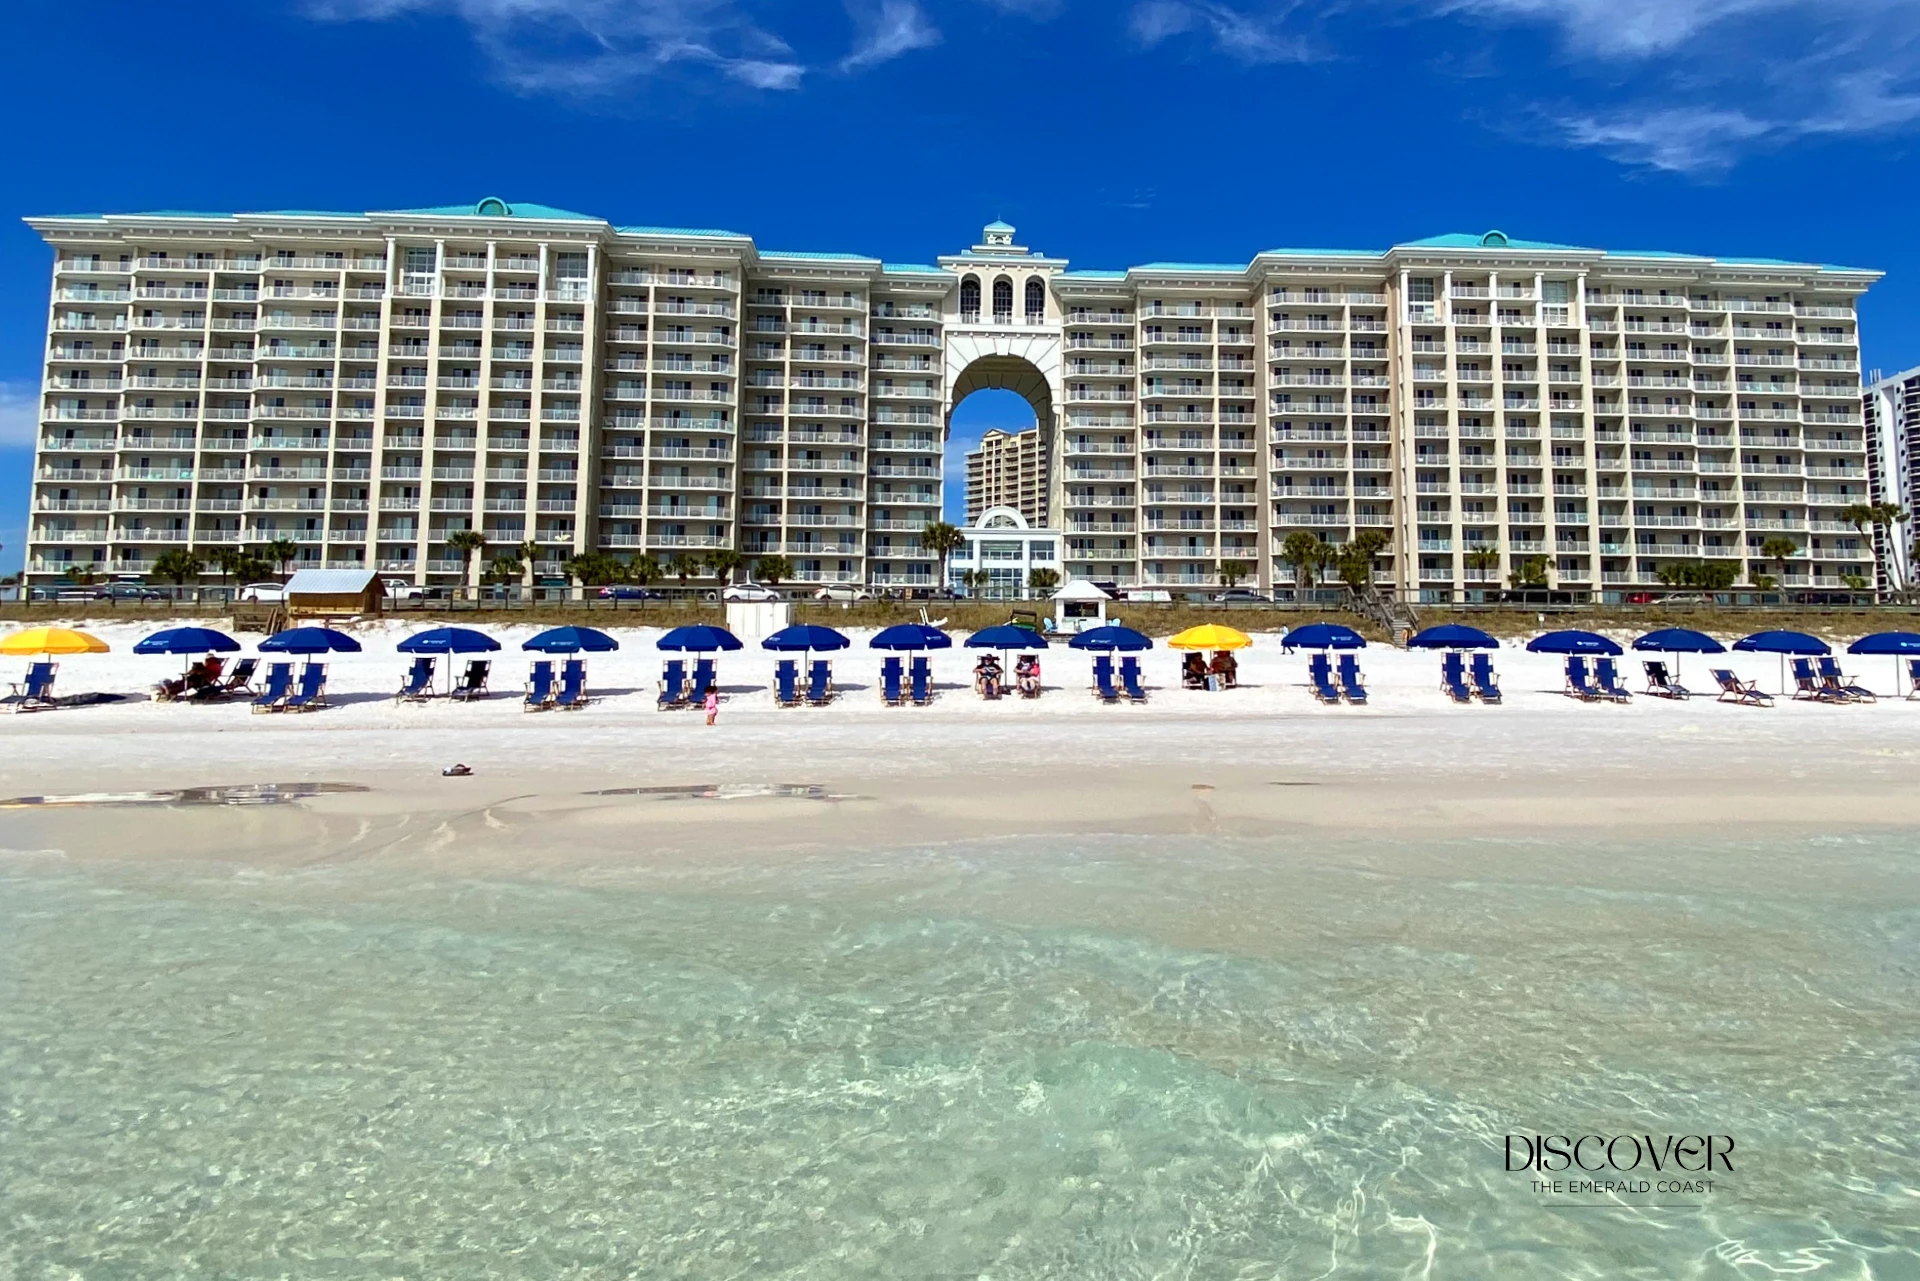 The Majestic Sun - Where to Stay in Destin with Crab Island Luxury Adventures